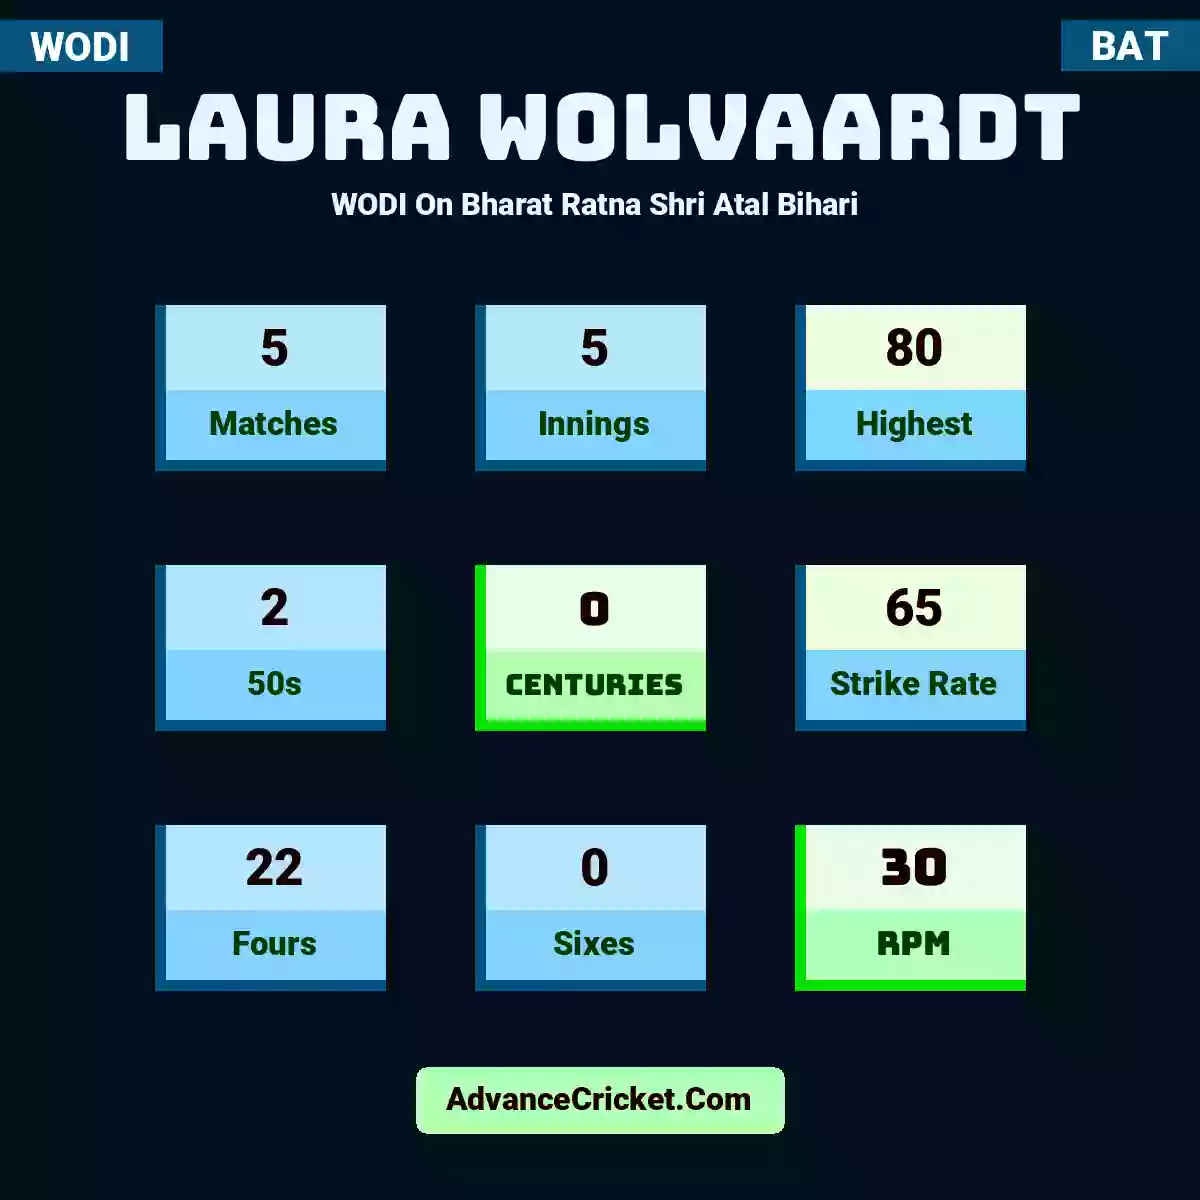 Laura Wolvaardt WODI  On Bharat Ratna Shri Atal Bihari , Laura Wolvaardt played 5 matches, scored 80 runs as highest, 2 half-centuries, and 0 centuries, with a strike rate of 65. L.Wolvaardt hit 22 fours and 0 sixes, with an RPM of 30.